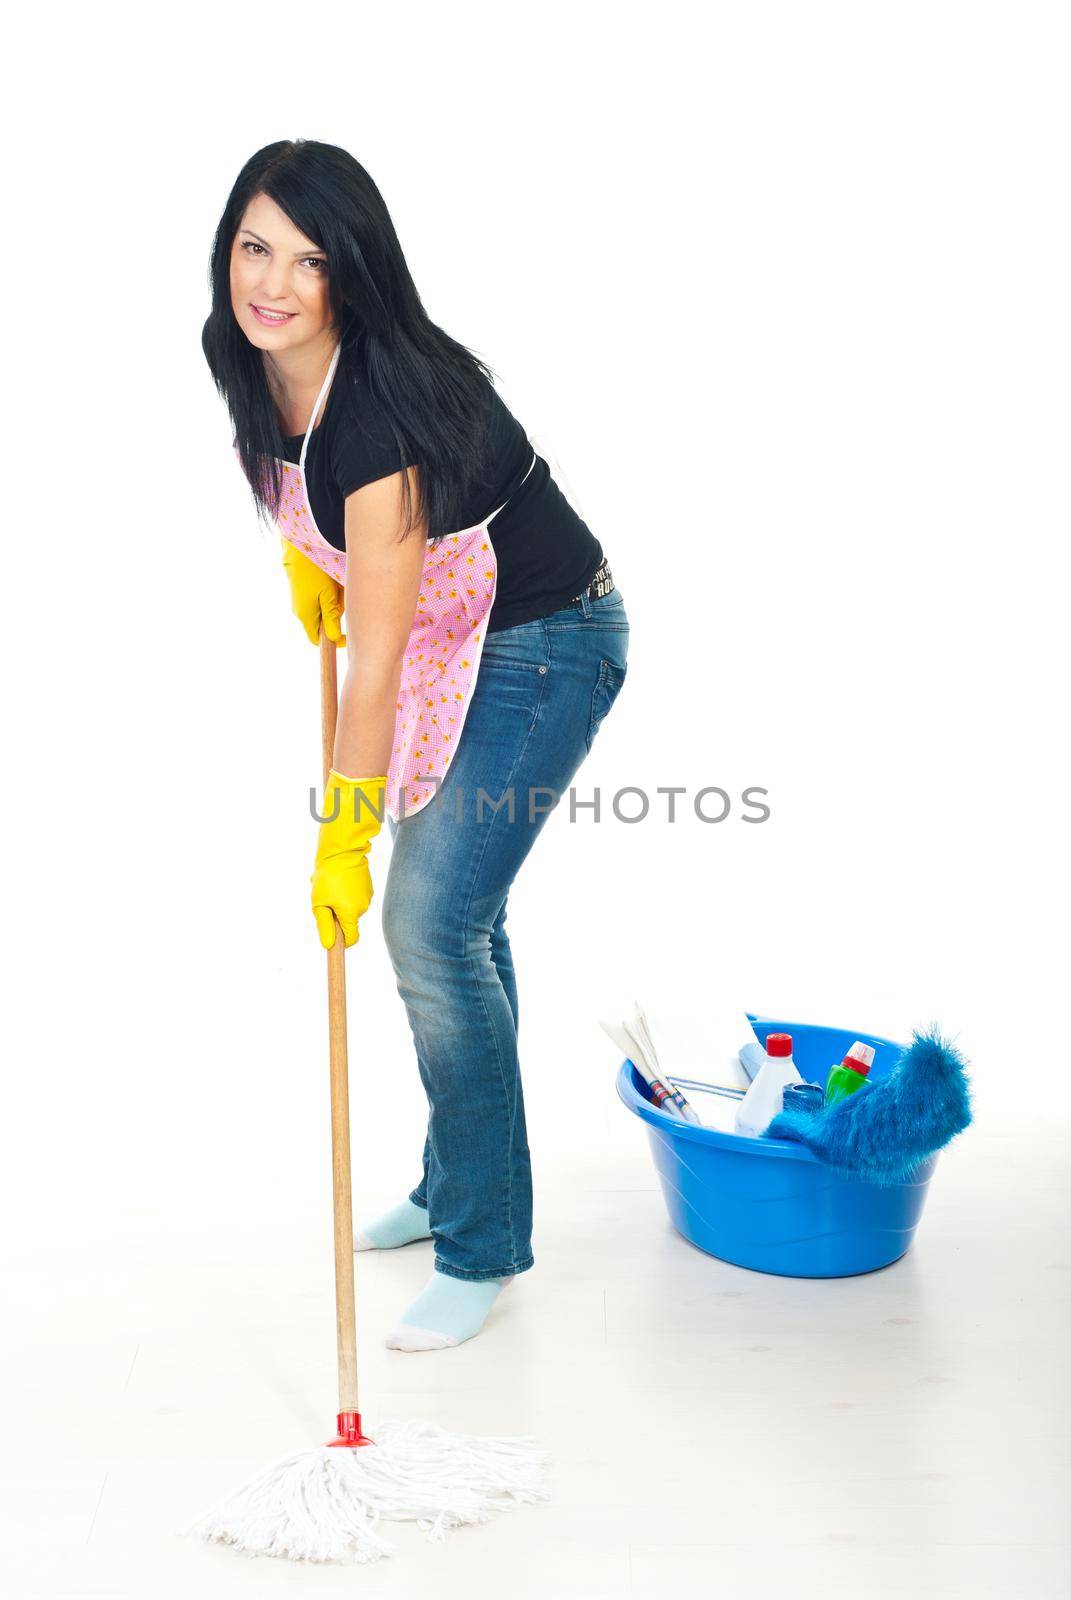 Beauty woman with pink apron washing white wooden floor with mop 